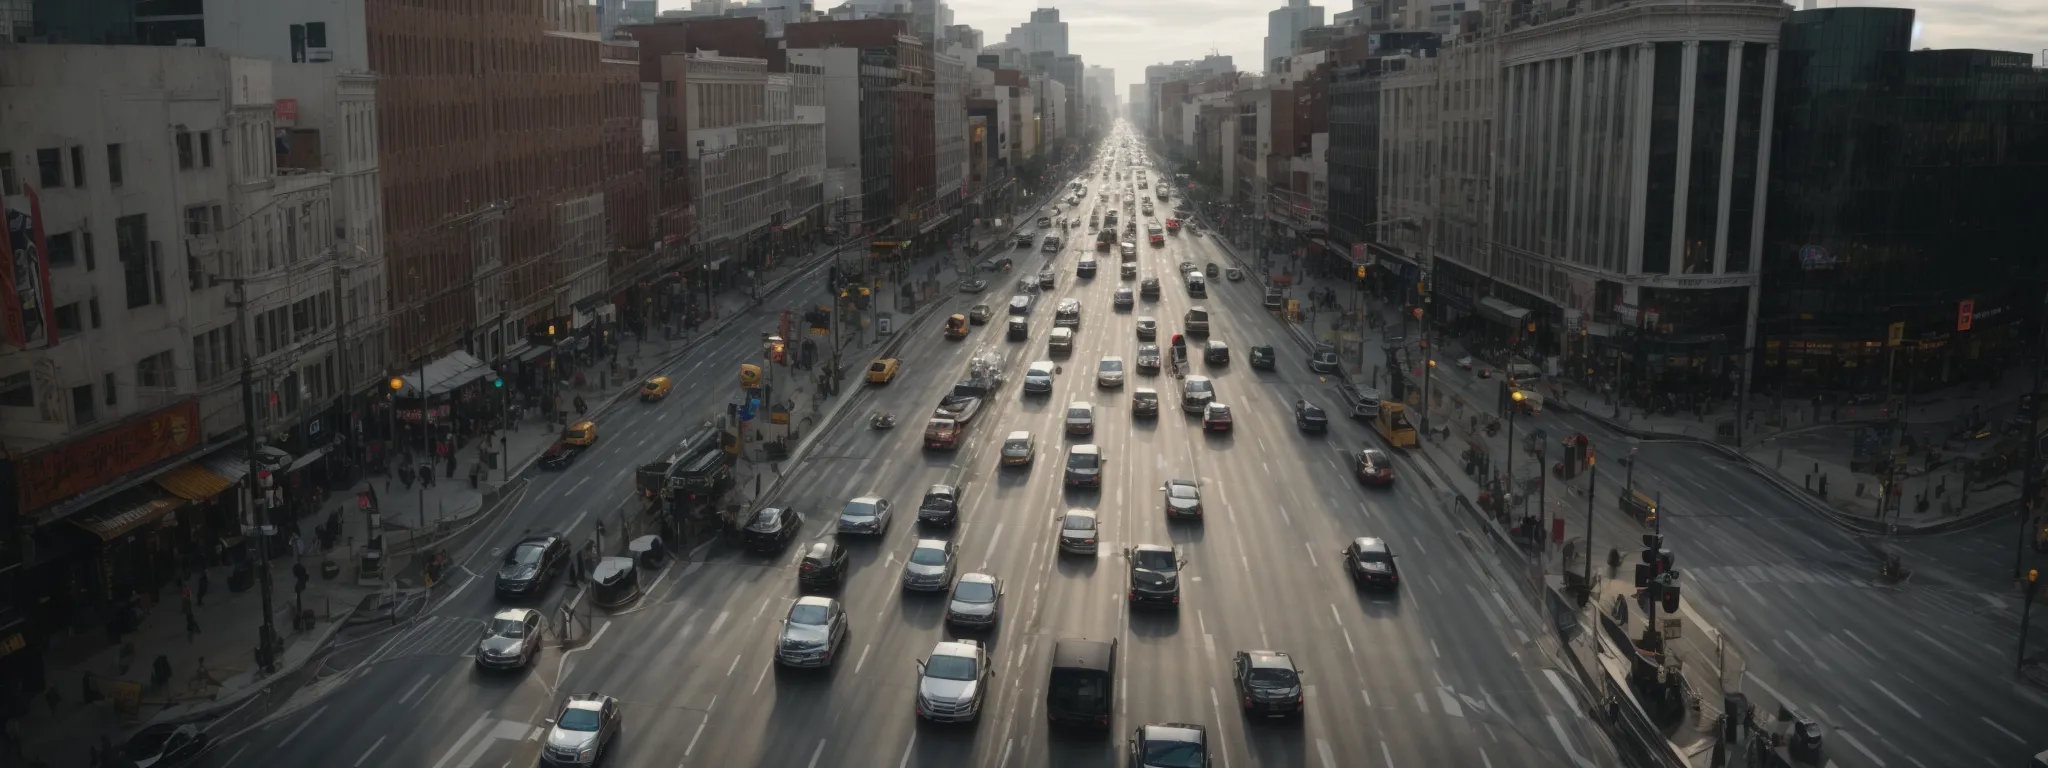 a bustling city intersection with streams of cars symbolizing constant movement and activity.